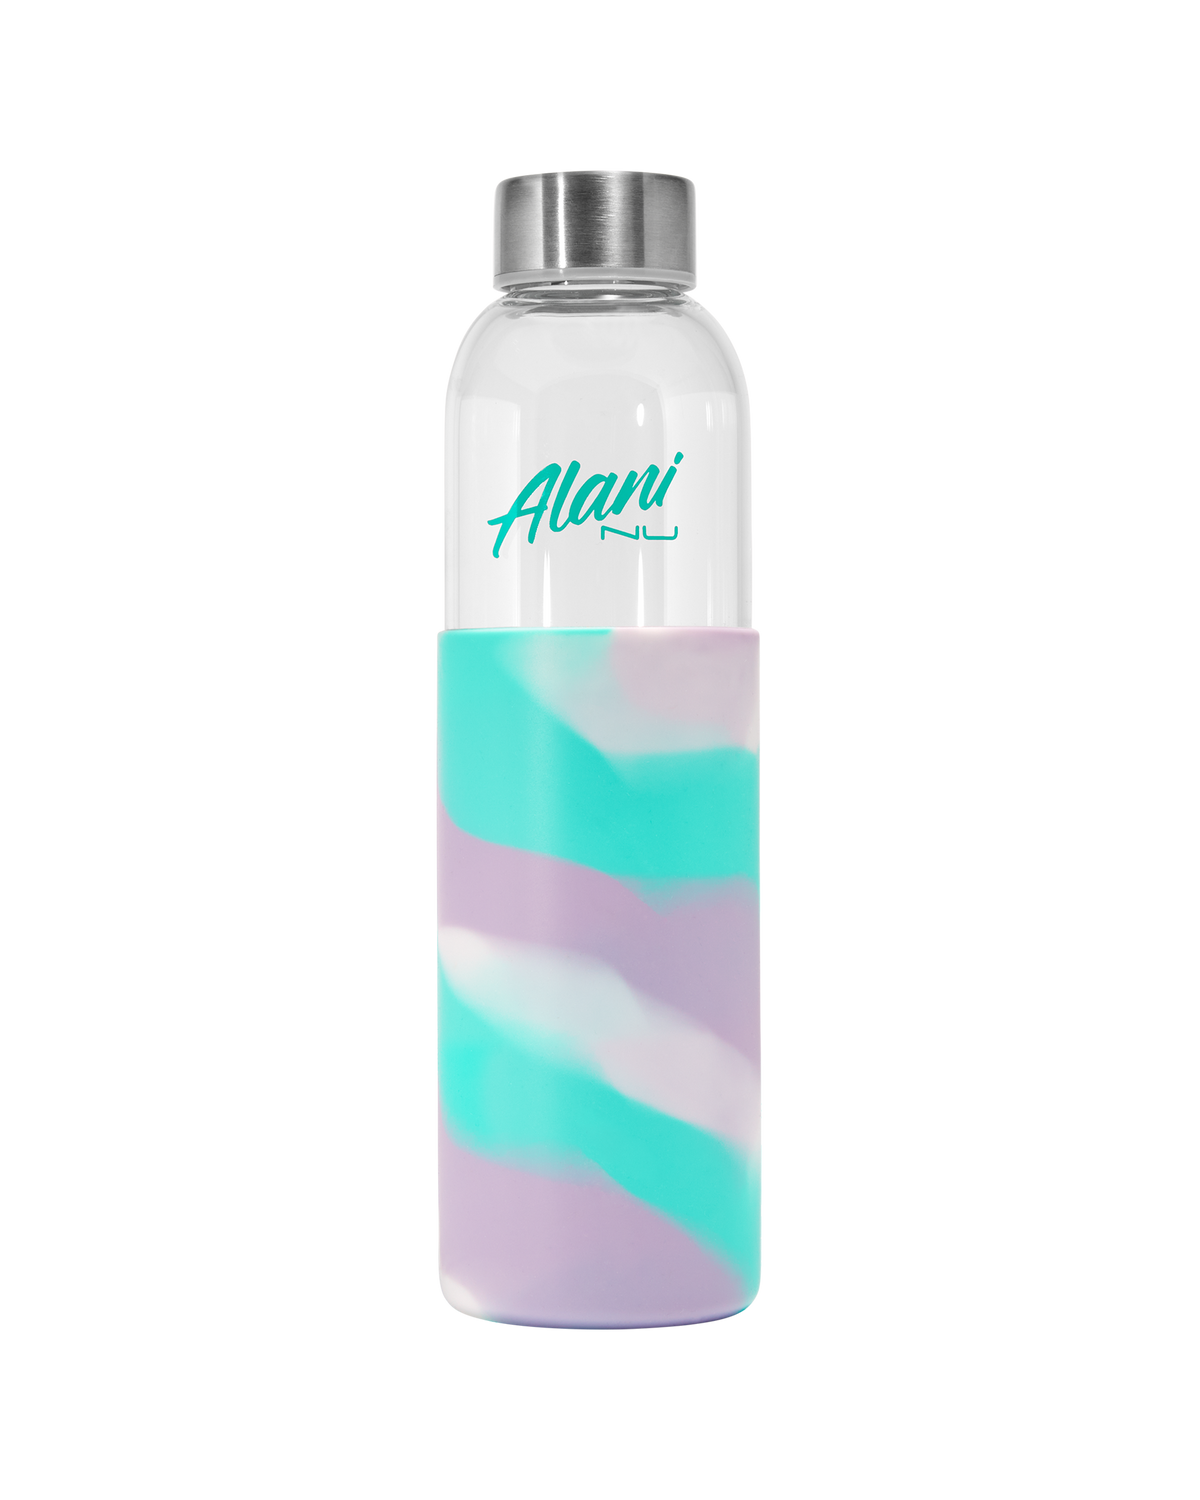 An Alani nu glass water bottle in purple marble color.